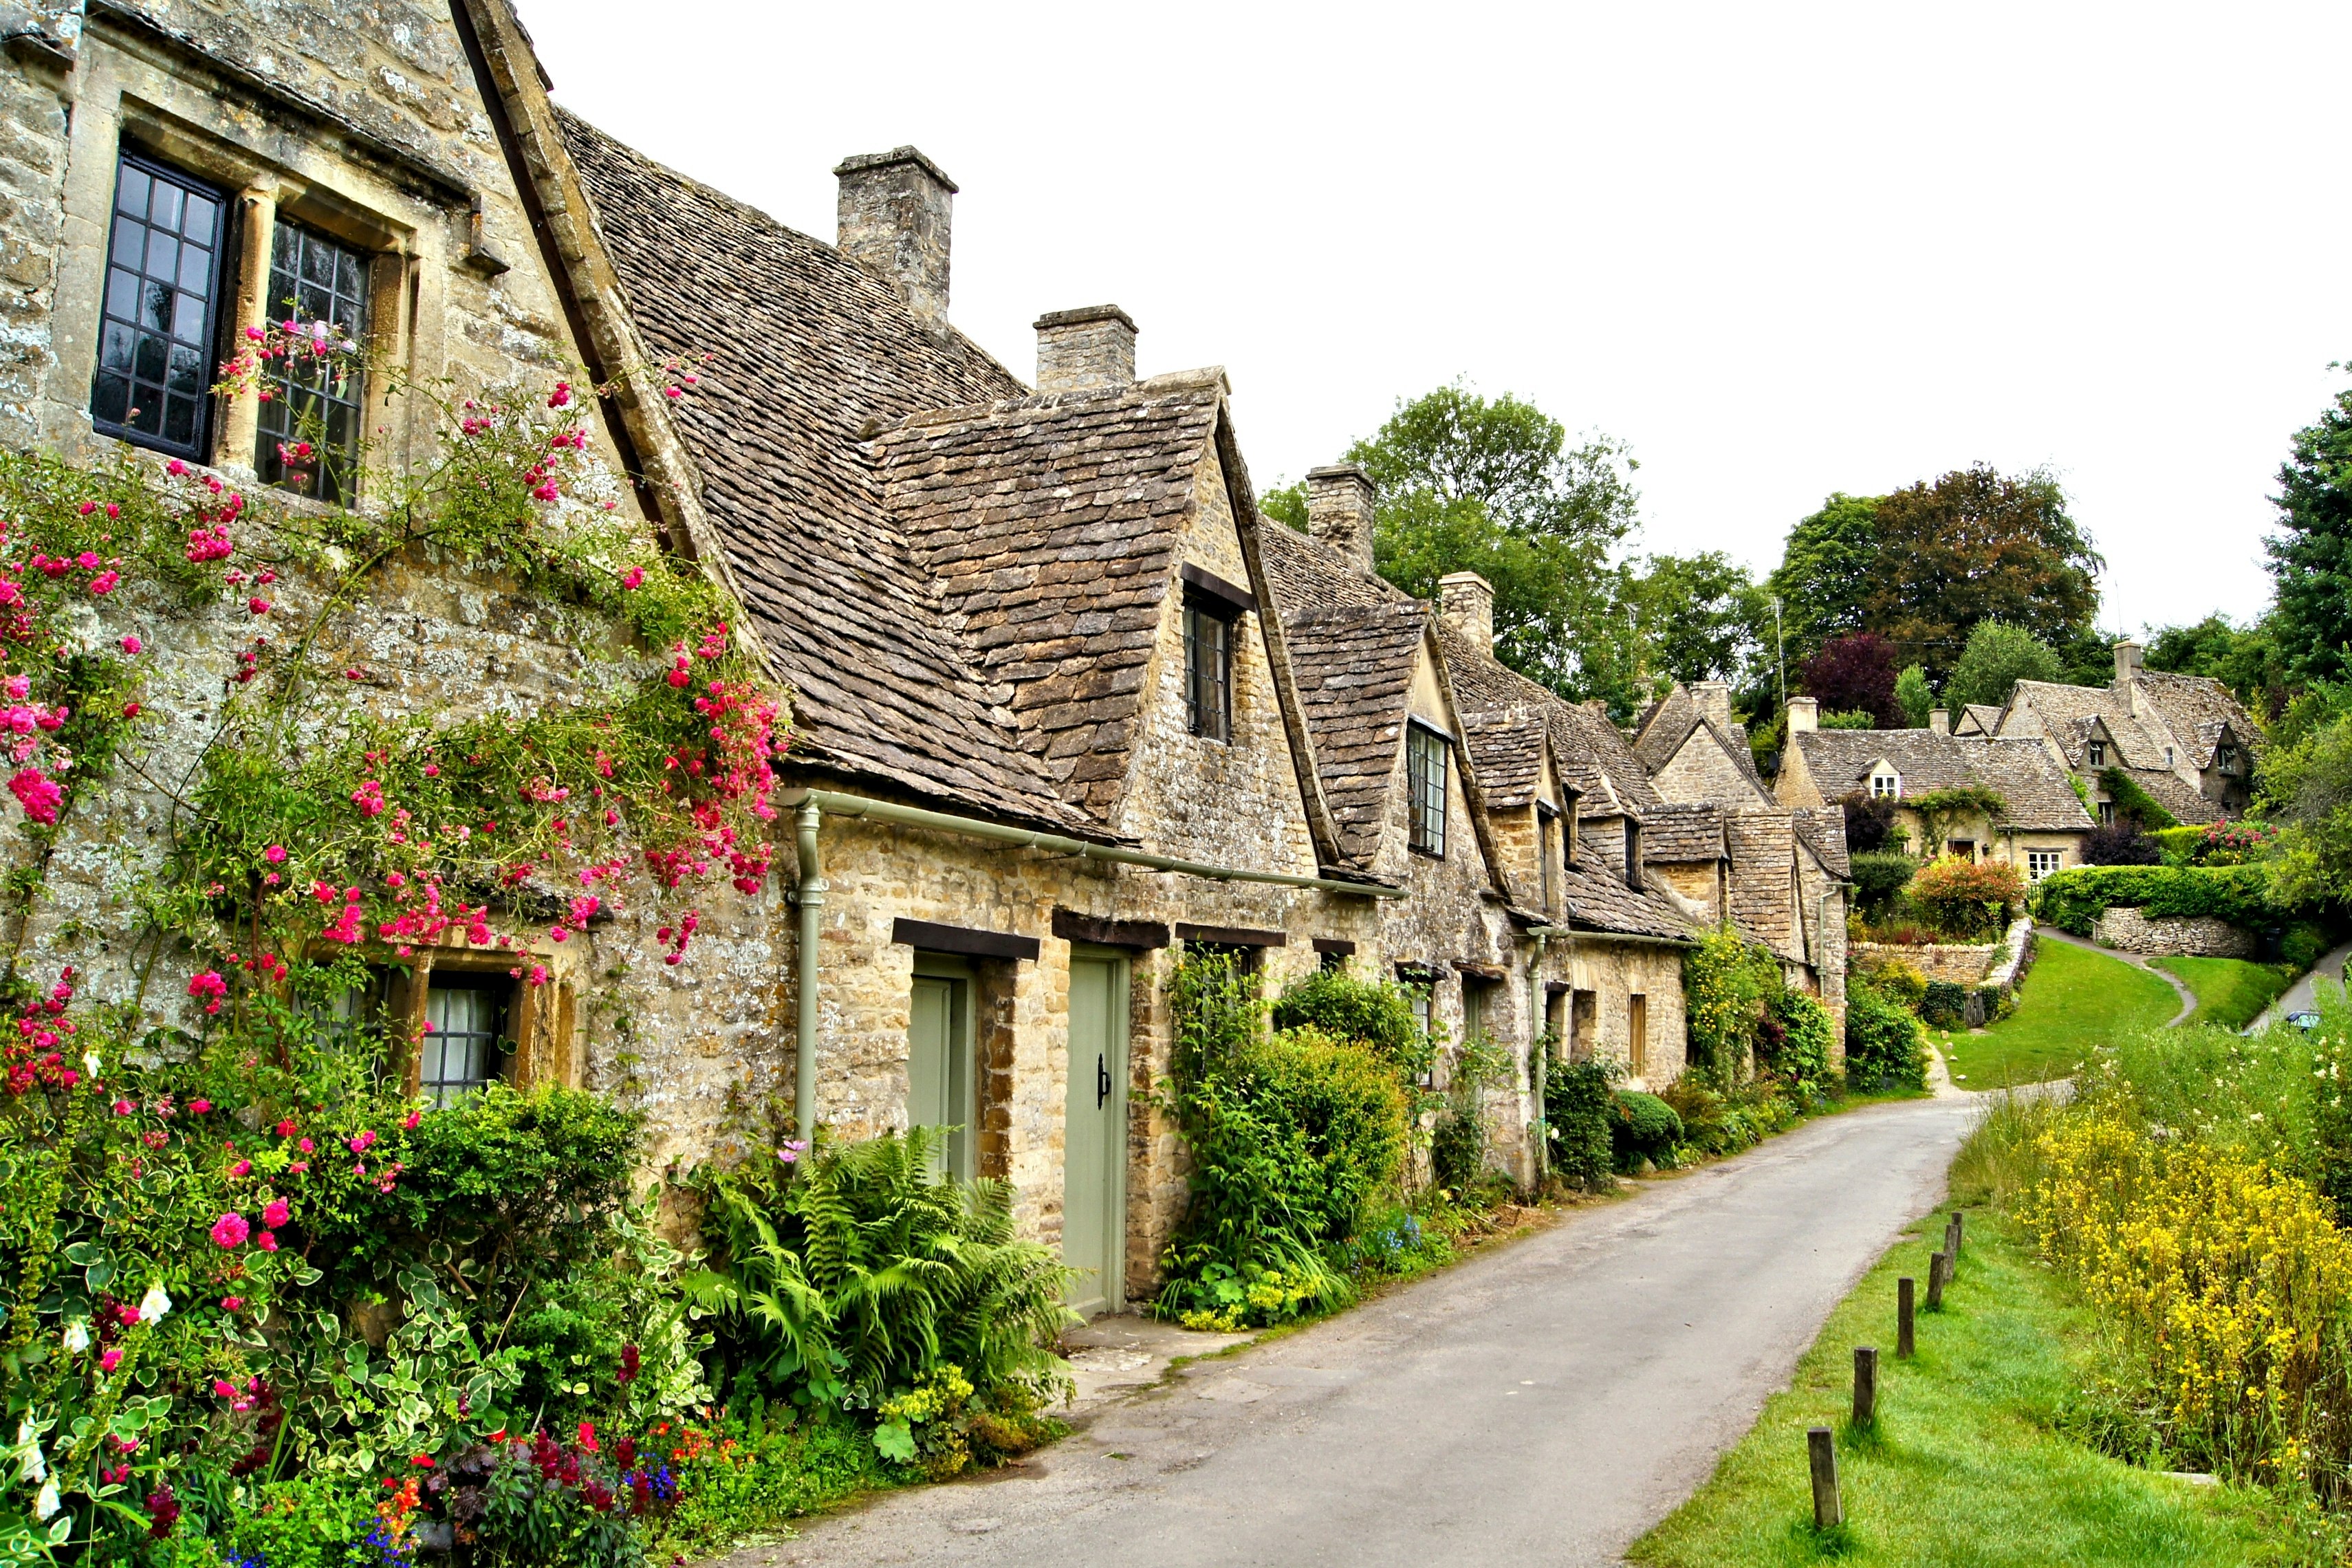 Houses dating from the 14th century on Arlington Row, Bibury, the Cotswolds, England, United Kingdom